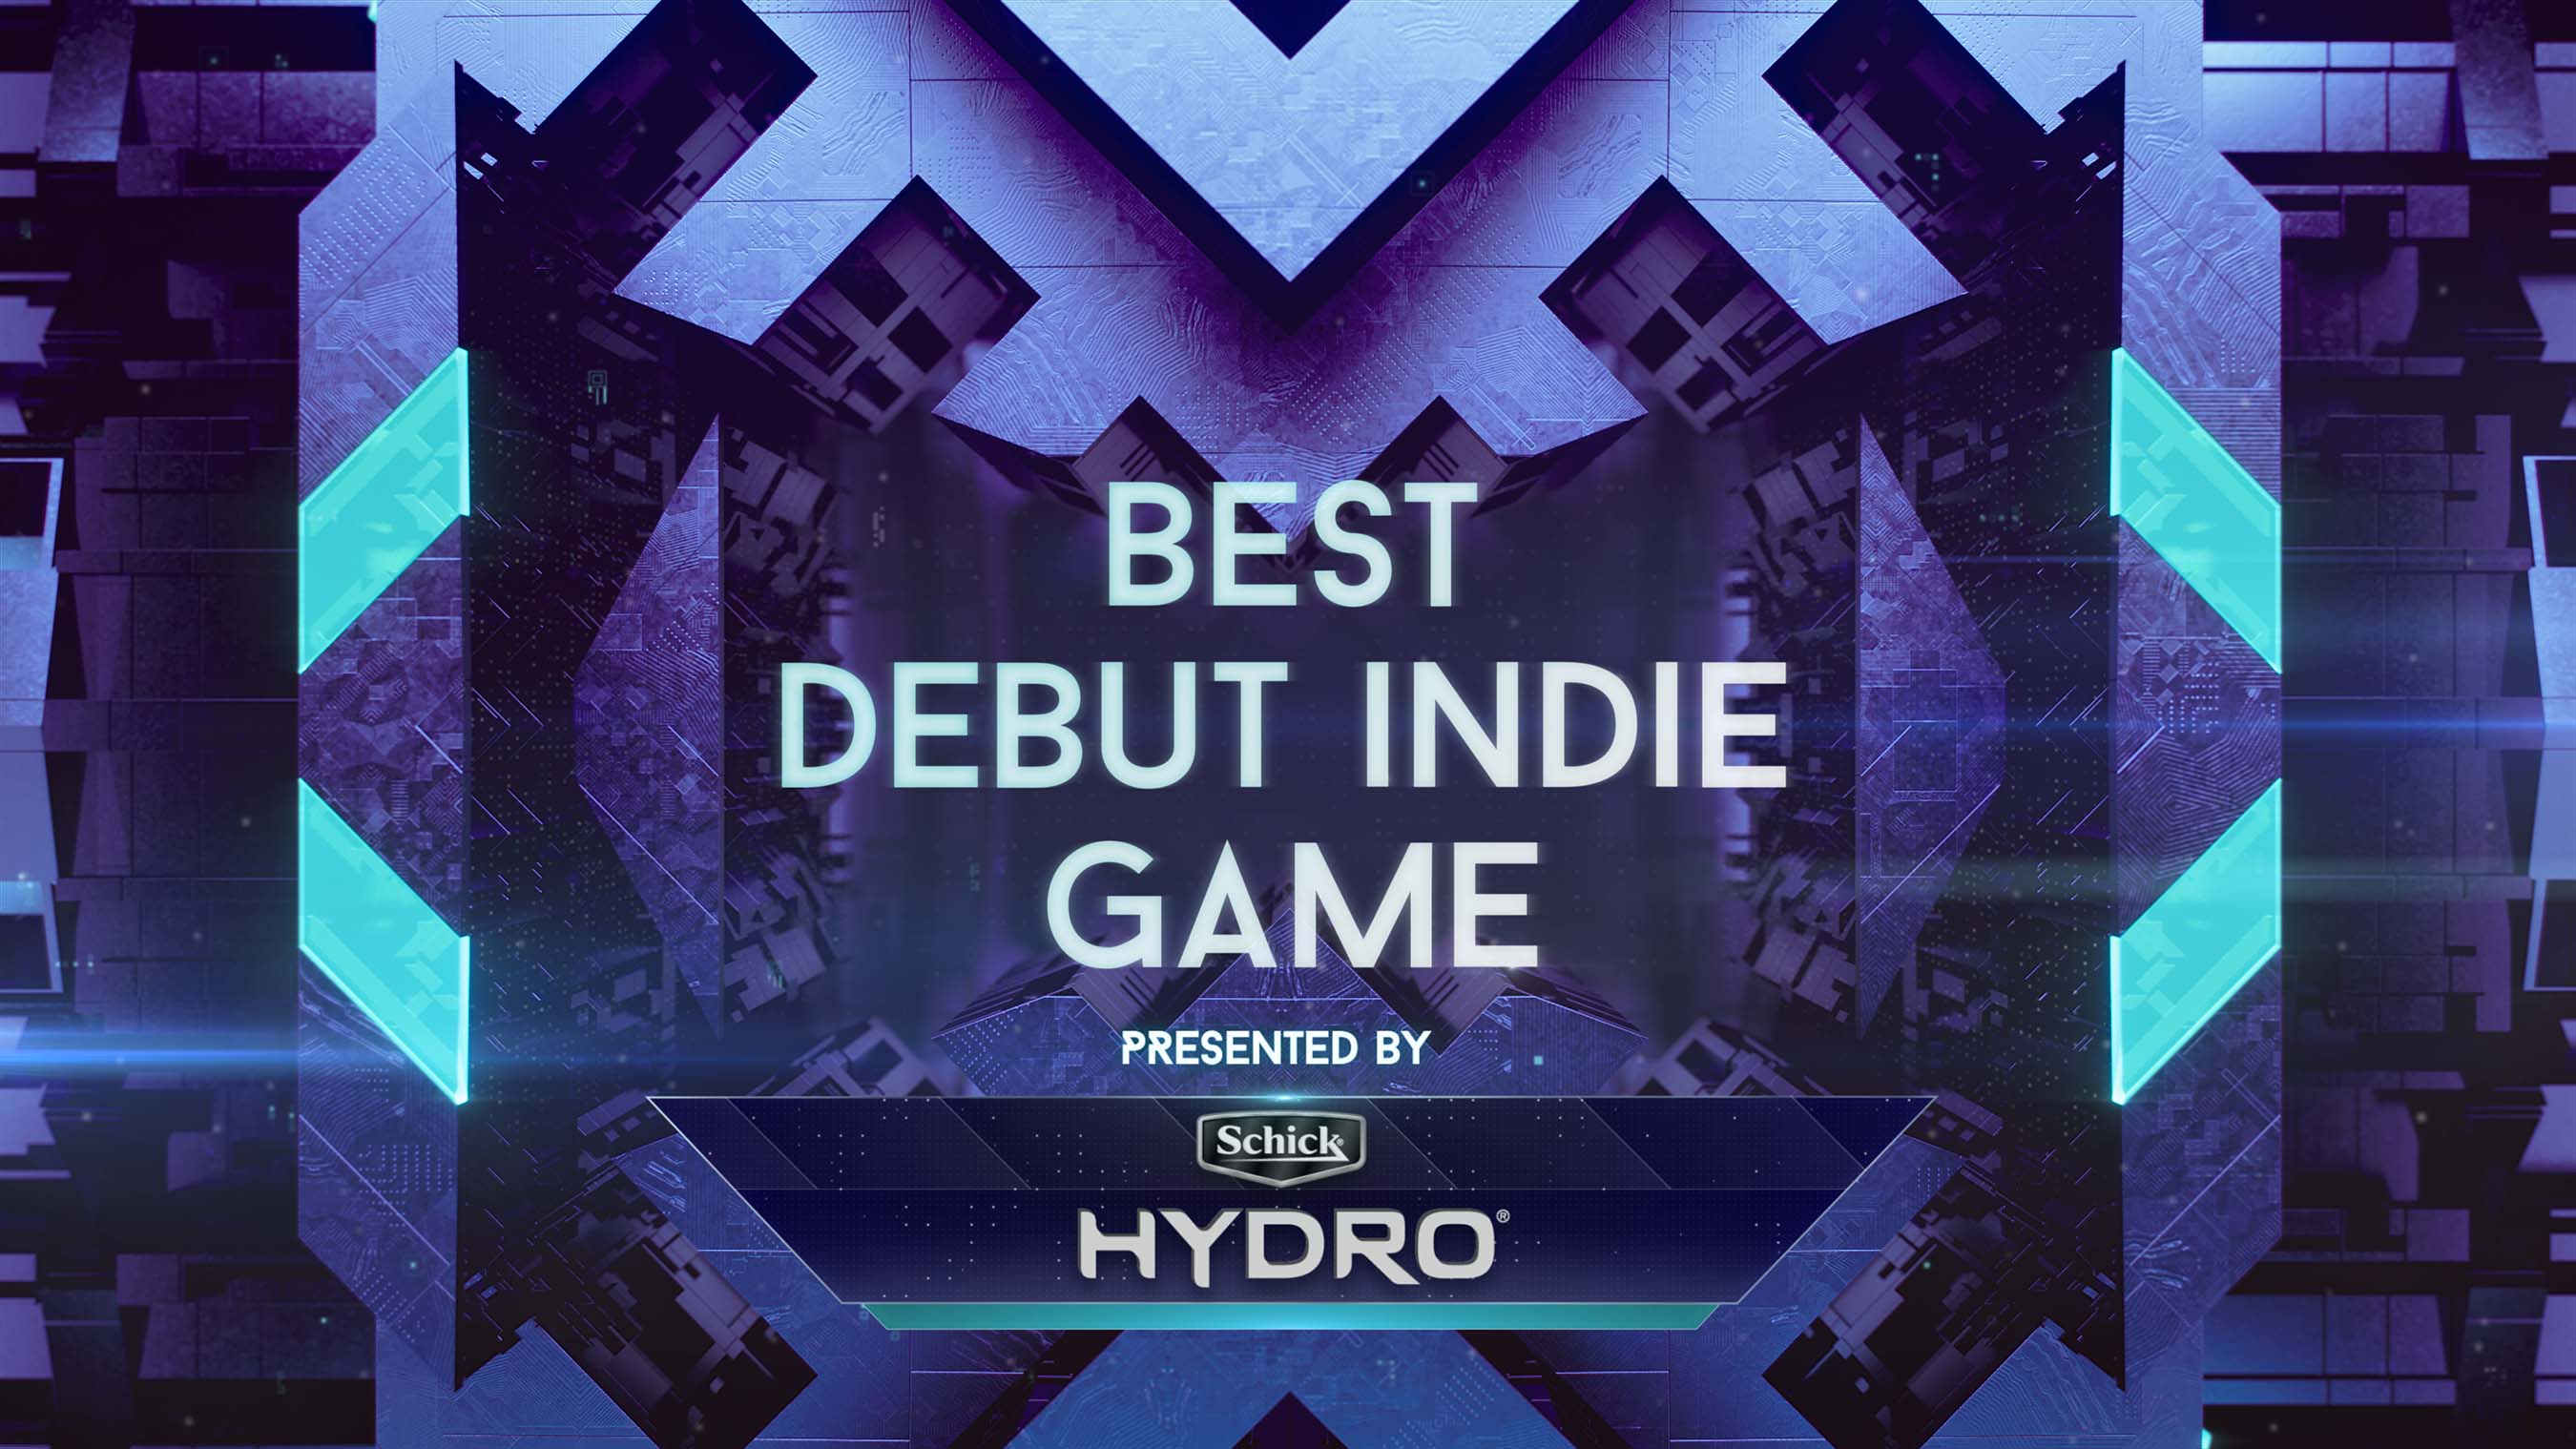 Vote for the “Best Debut Indie Game - Presented by Schick Hydro” and tune in to see who the winner is during The Game Awards 2017 live on Dec. 7 at 8:30 PM ET / 5:30 PM PT via www.TheGameAwards.com.